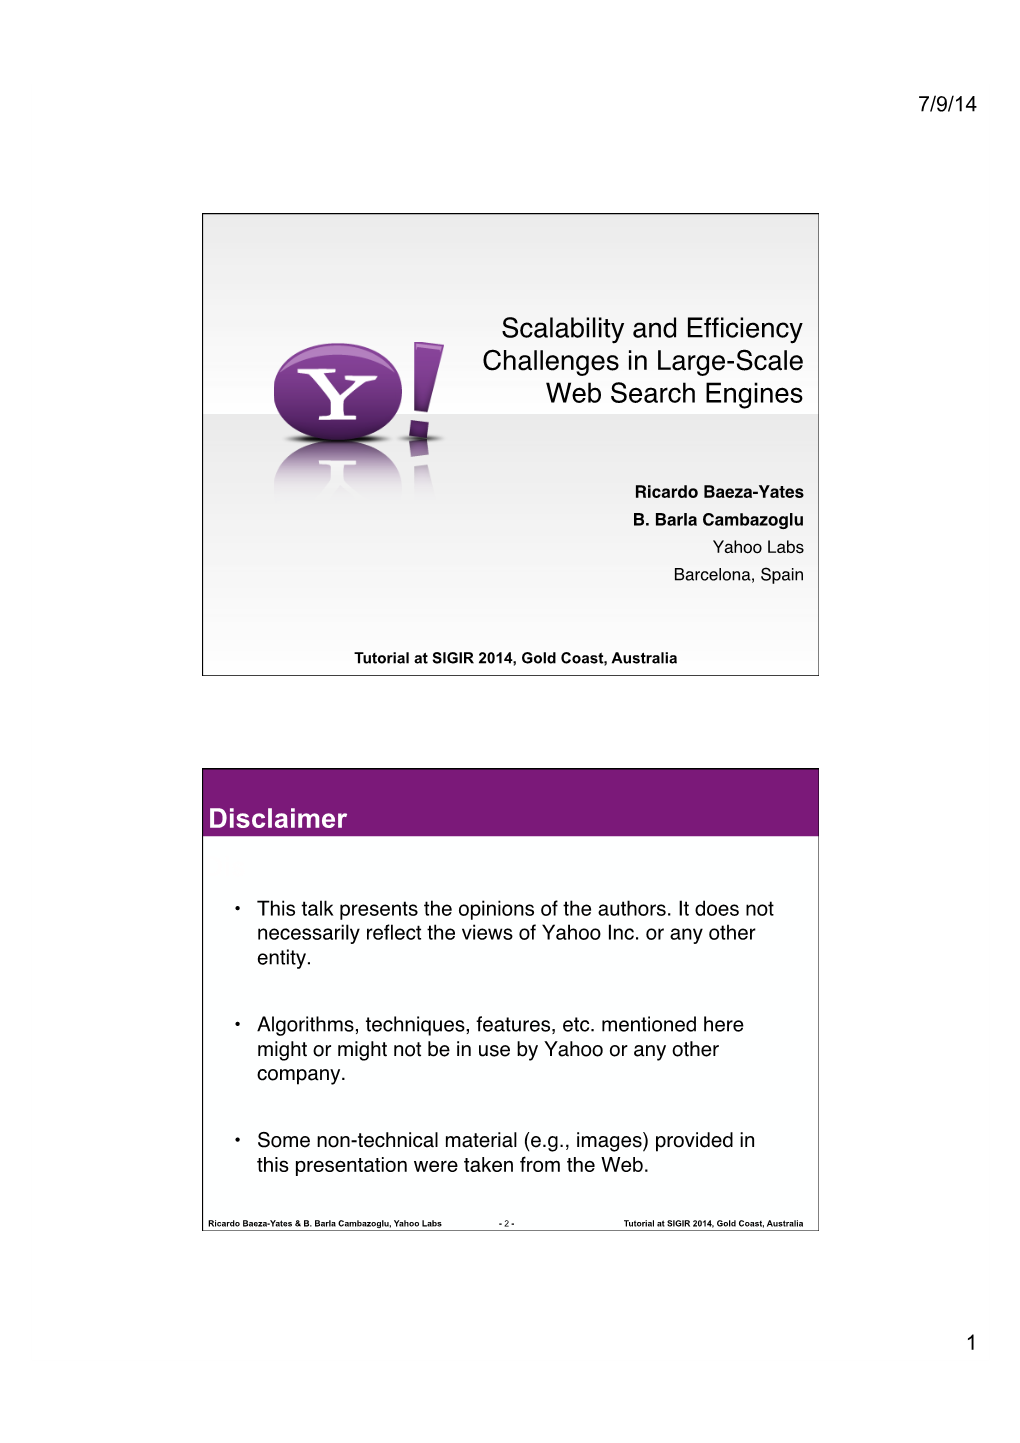 Scalability and Efficiency Challenges in Large-Scale Web Search